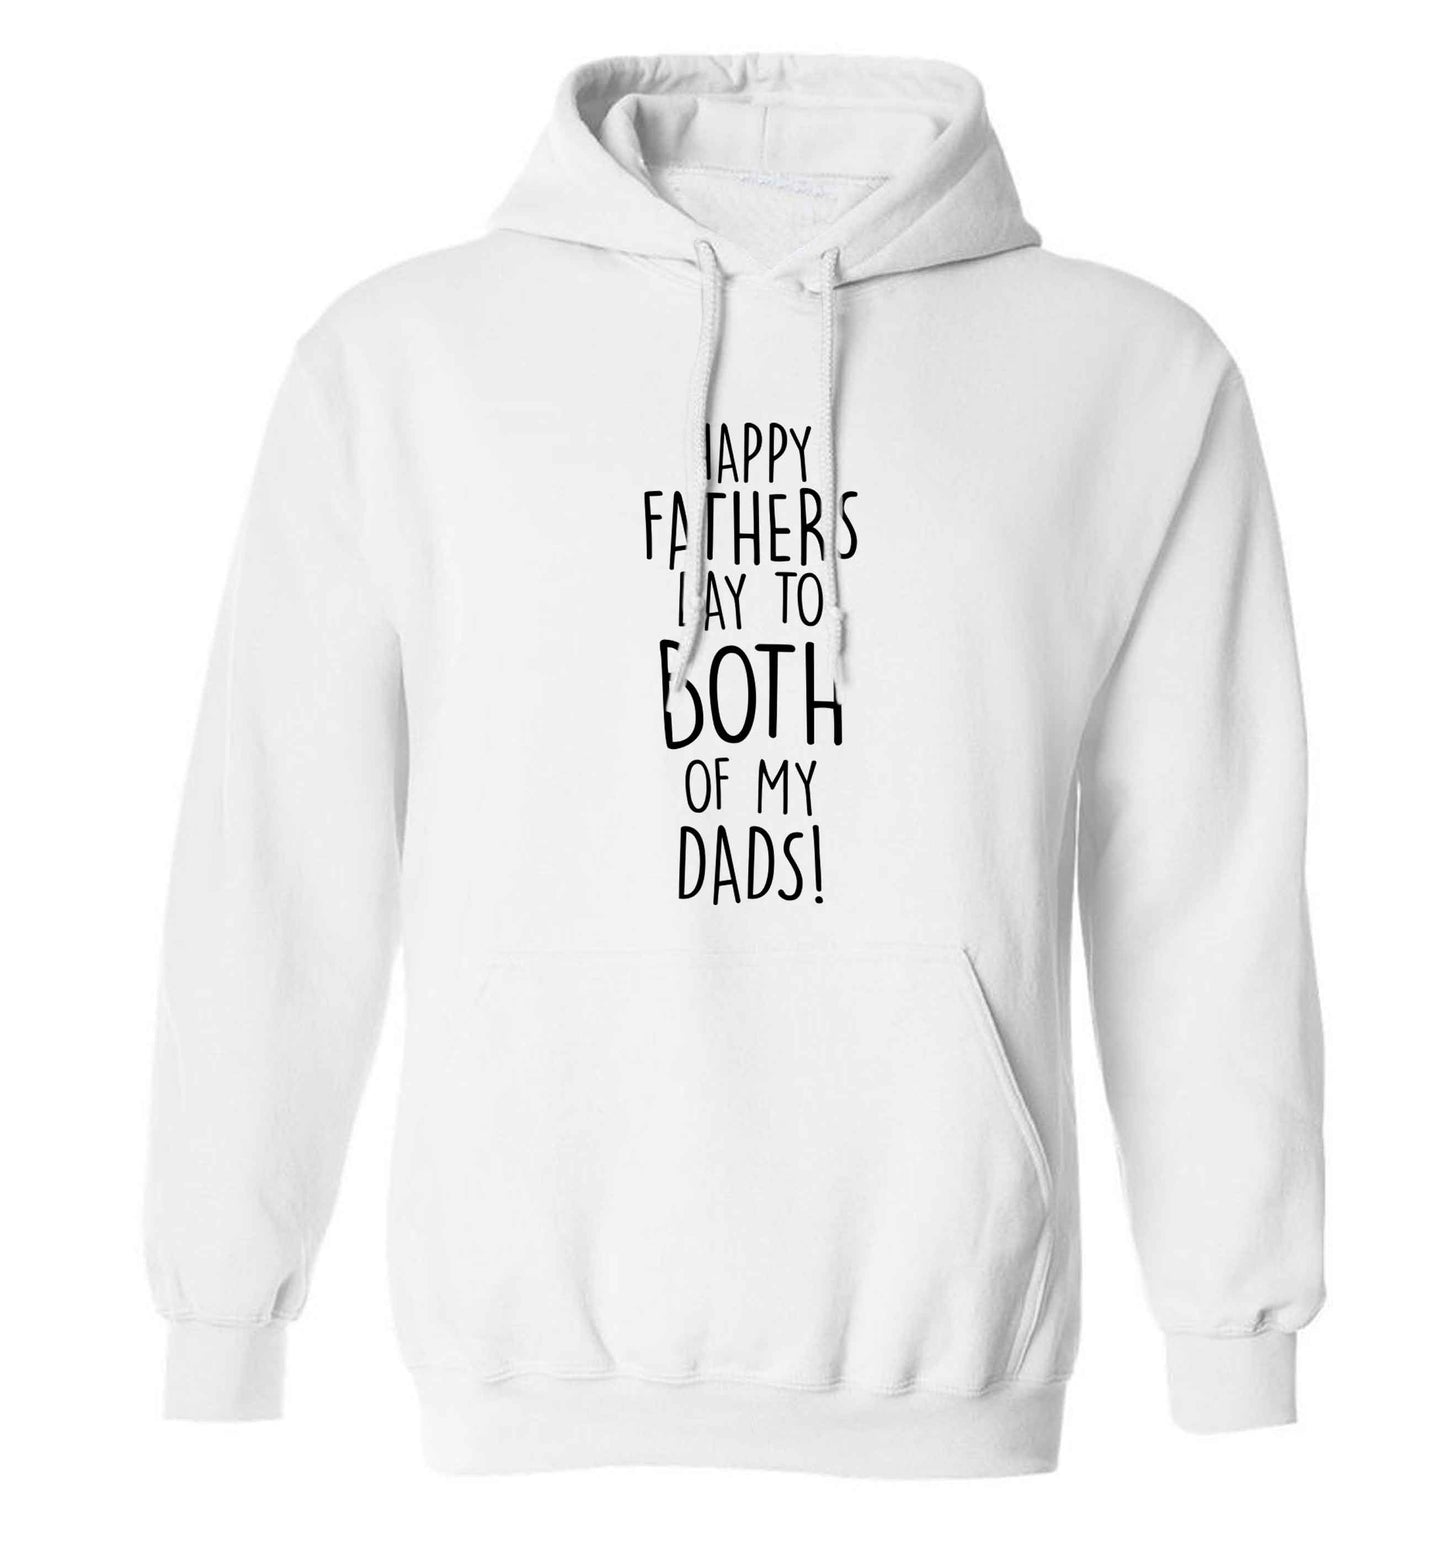 Happy Father's day to both of my dads adults unisex white hoodie 2XL